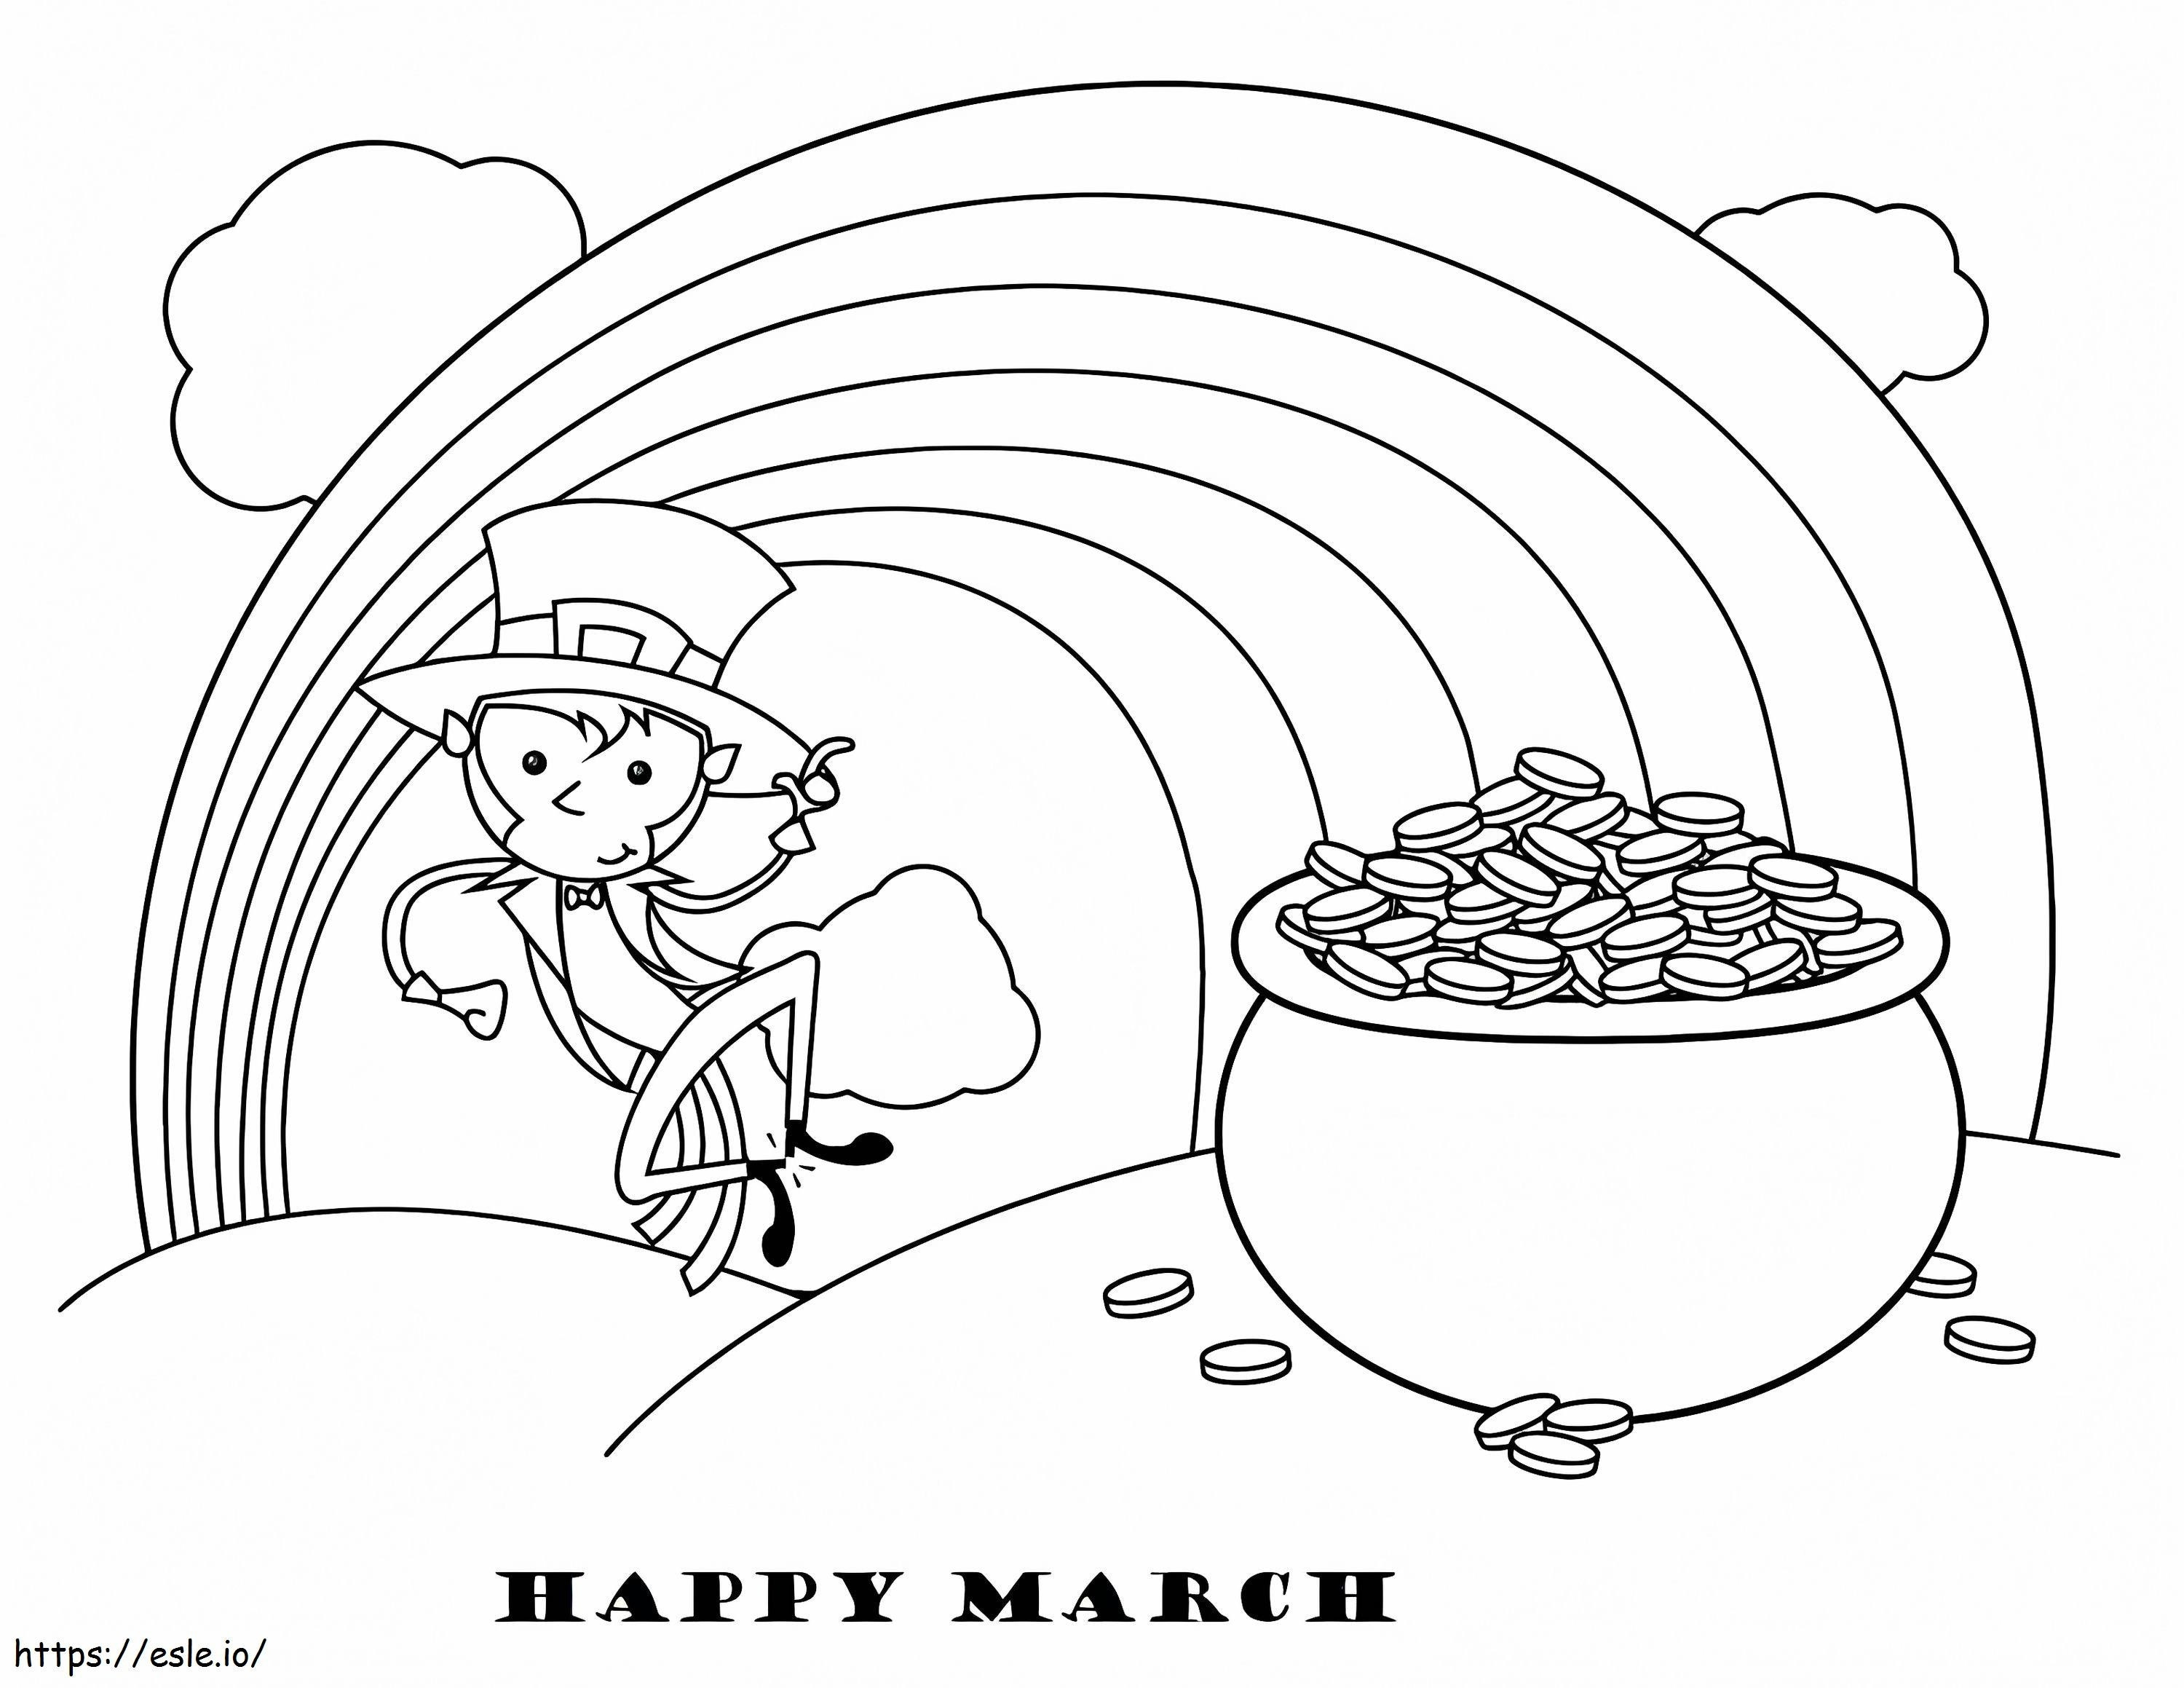 Happy March Coloring Page 3 coloring page